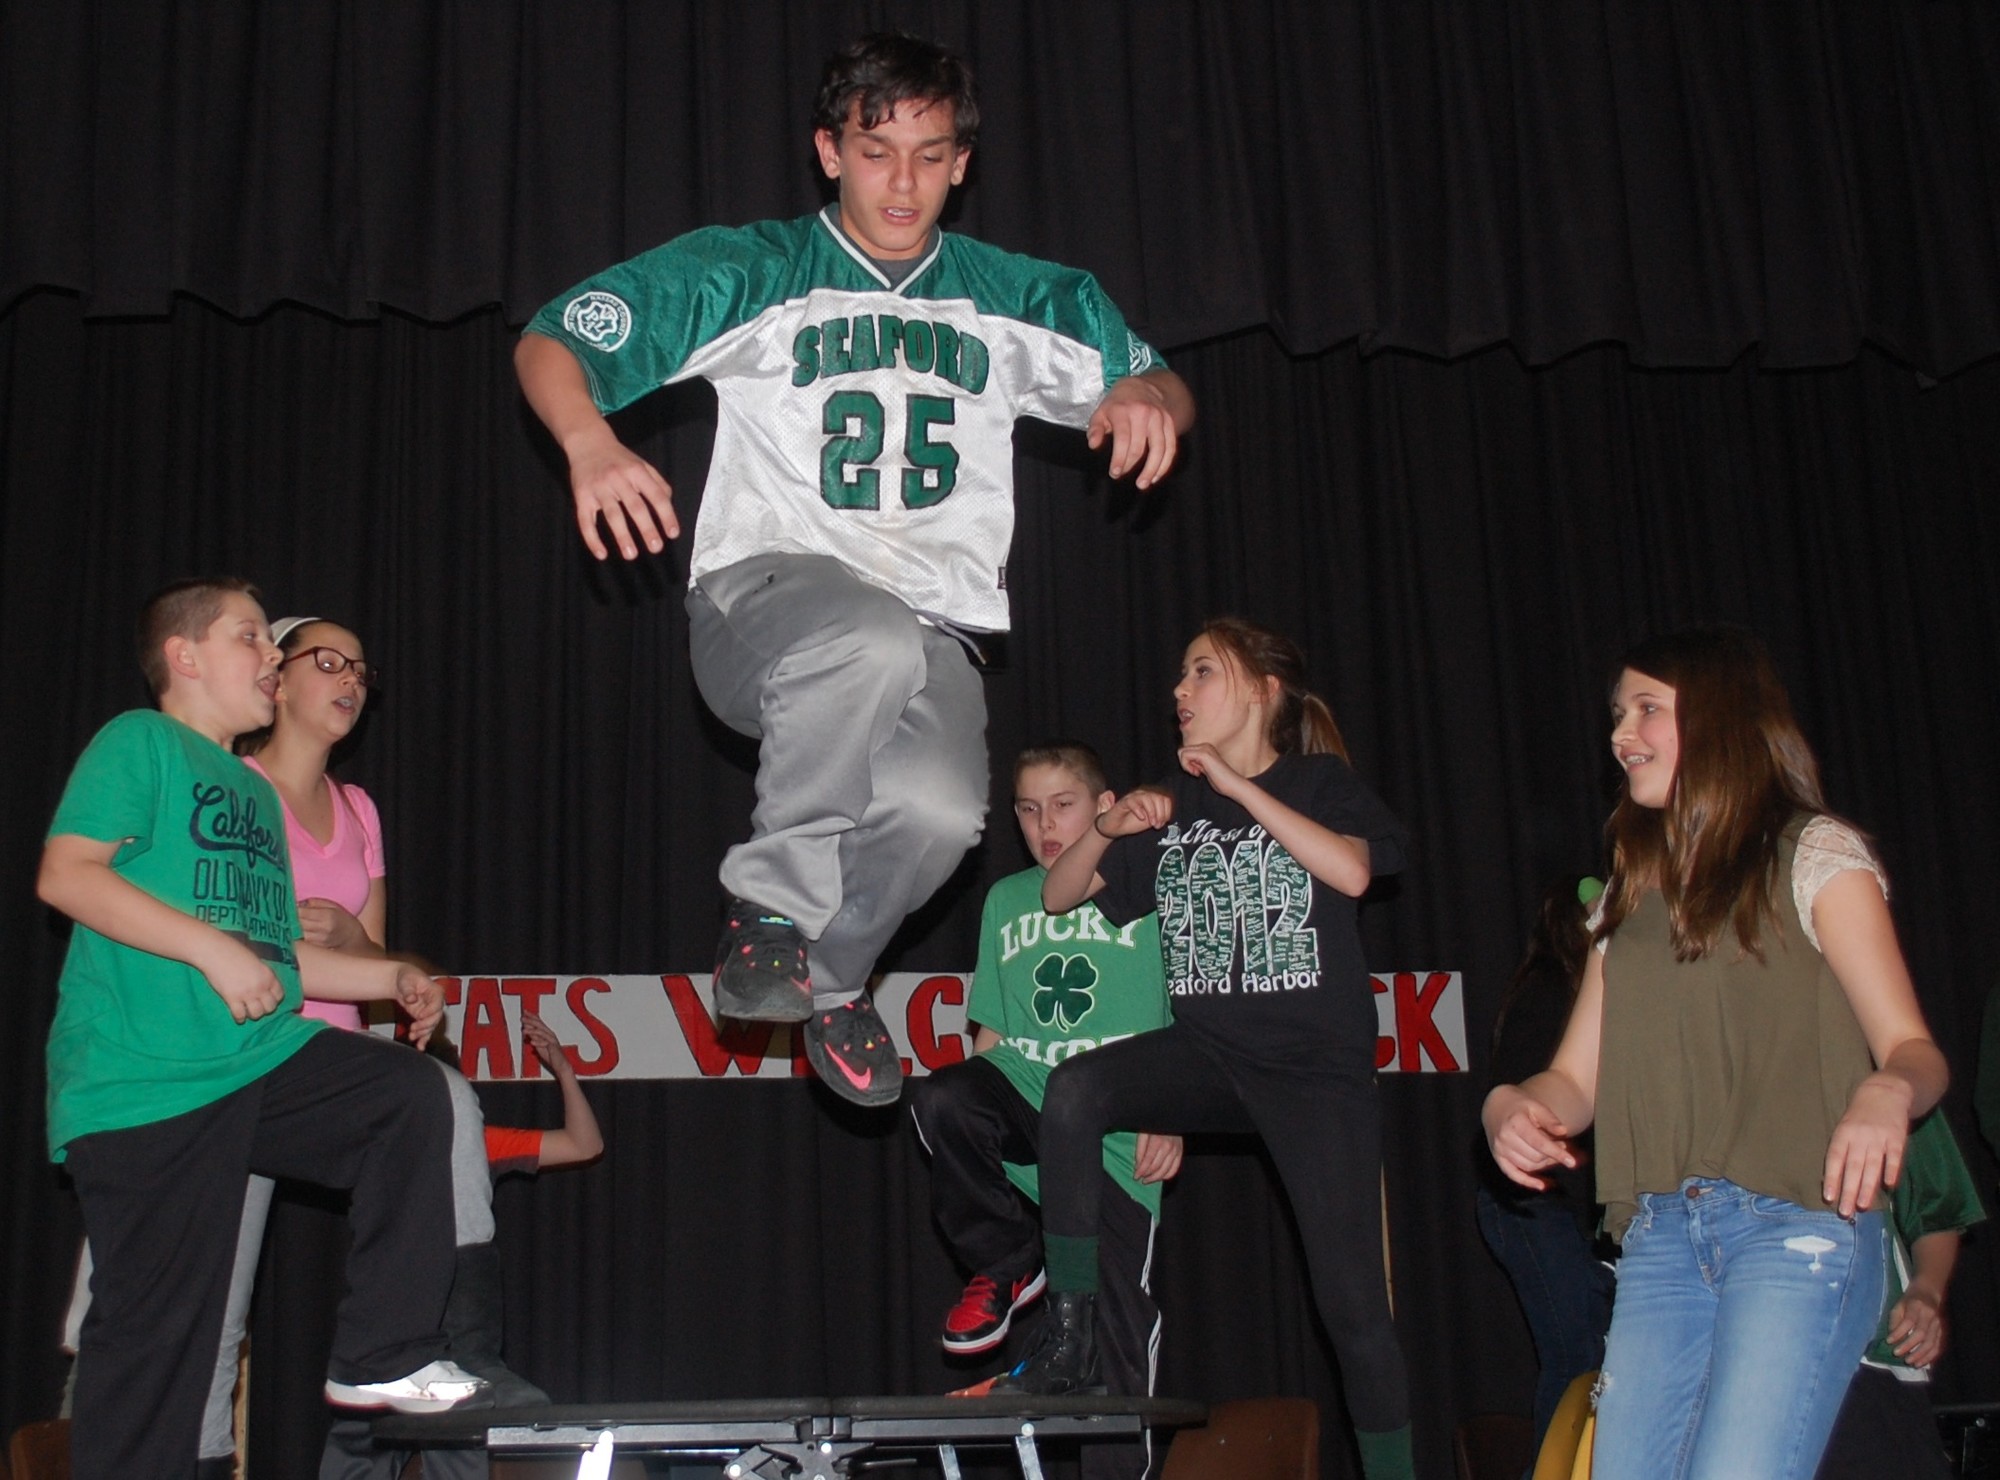 Nick Luciano, who plays Zeke in Seaford Middle School’s upcoming production of “High School Musical,” stuck his landing while practicing a musical number during a rehearsal last week. Performances are this Friday and Saturday nights.